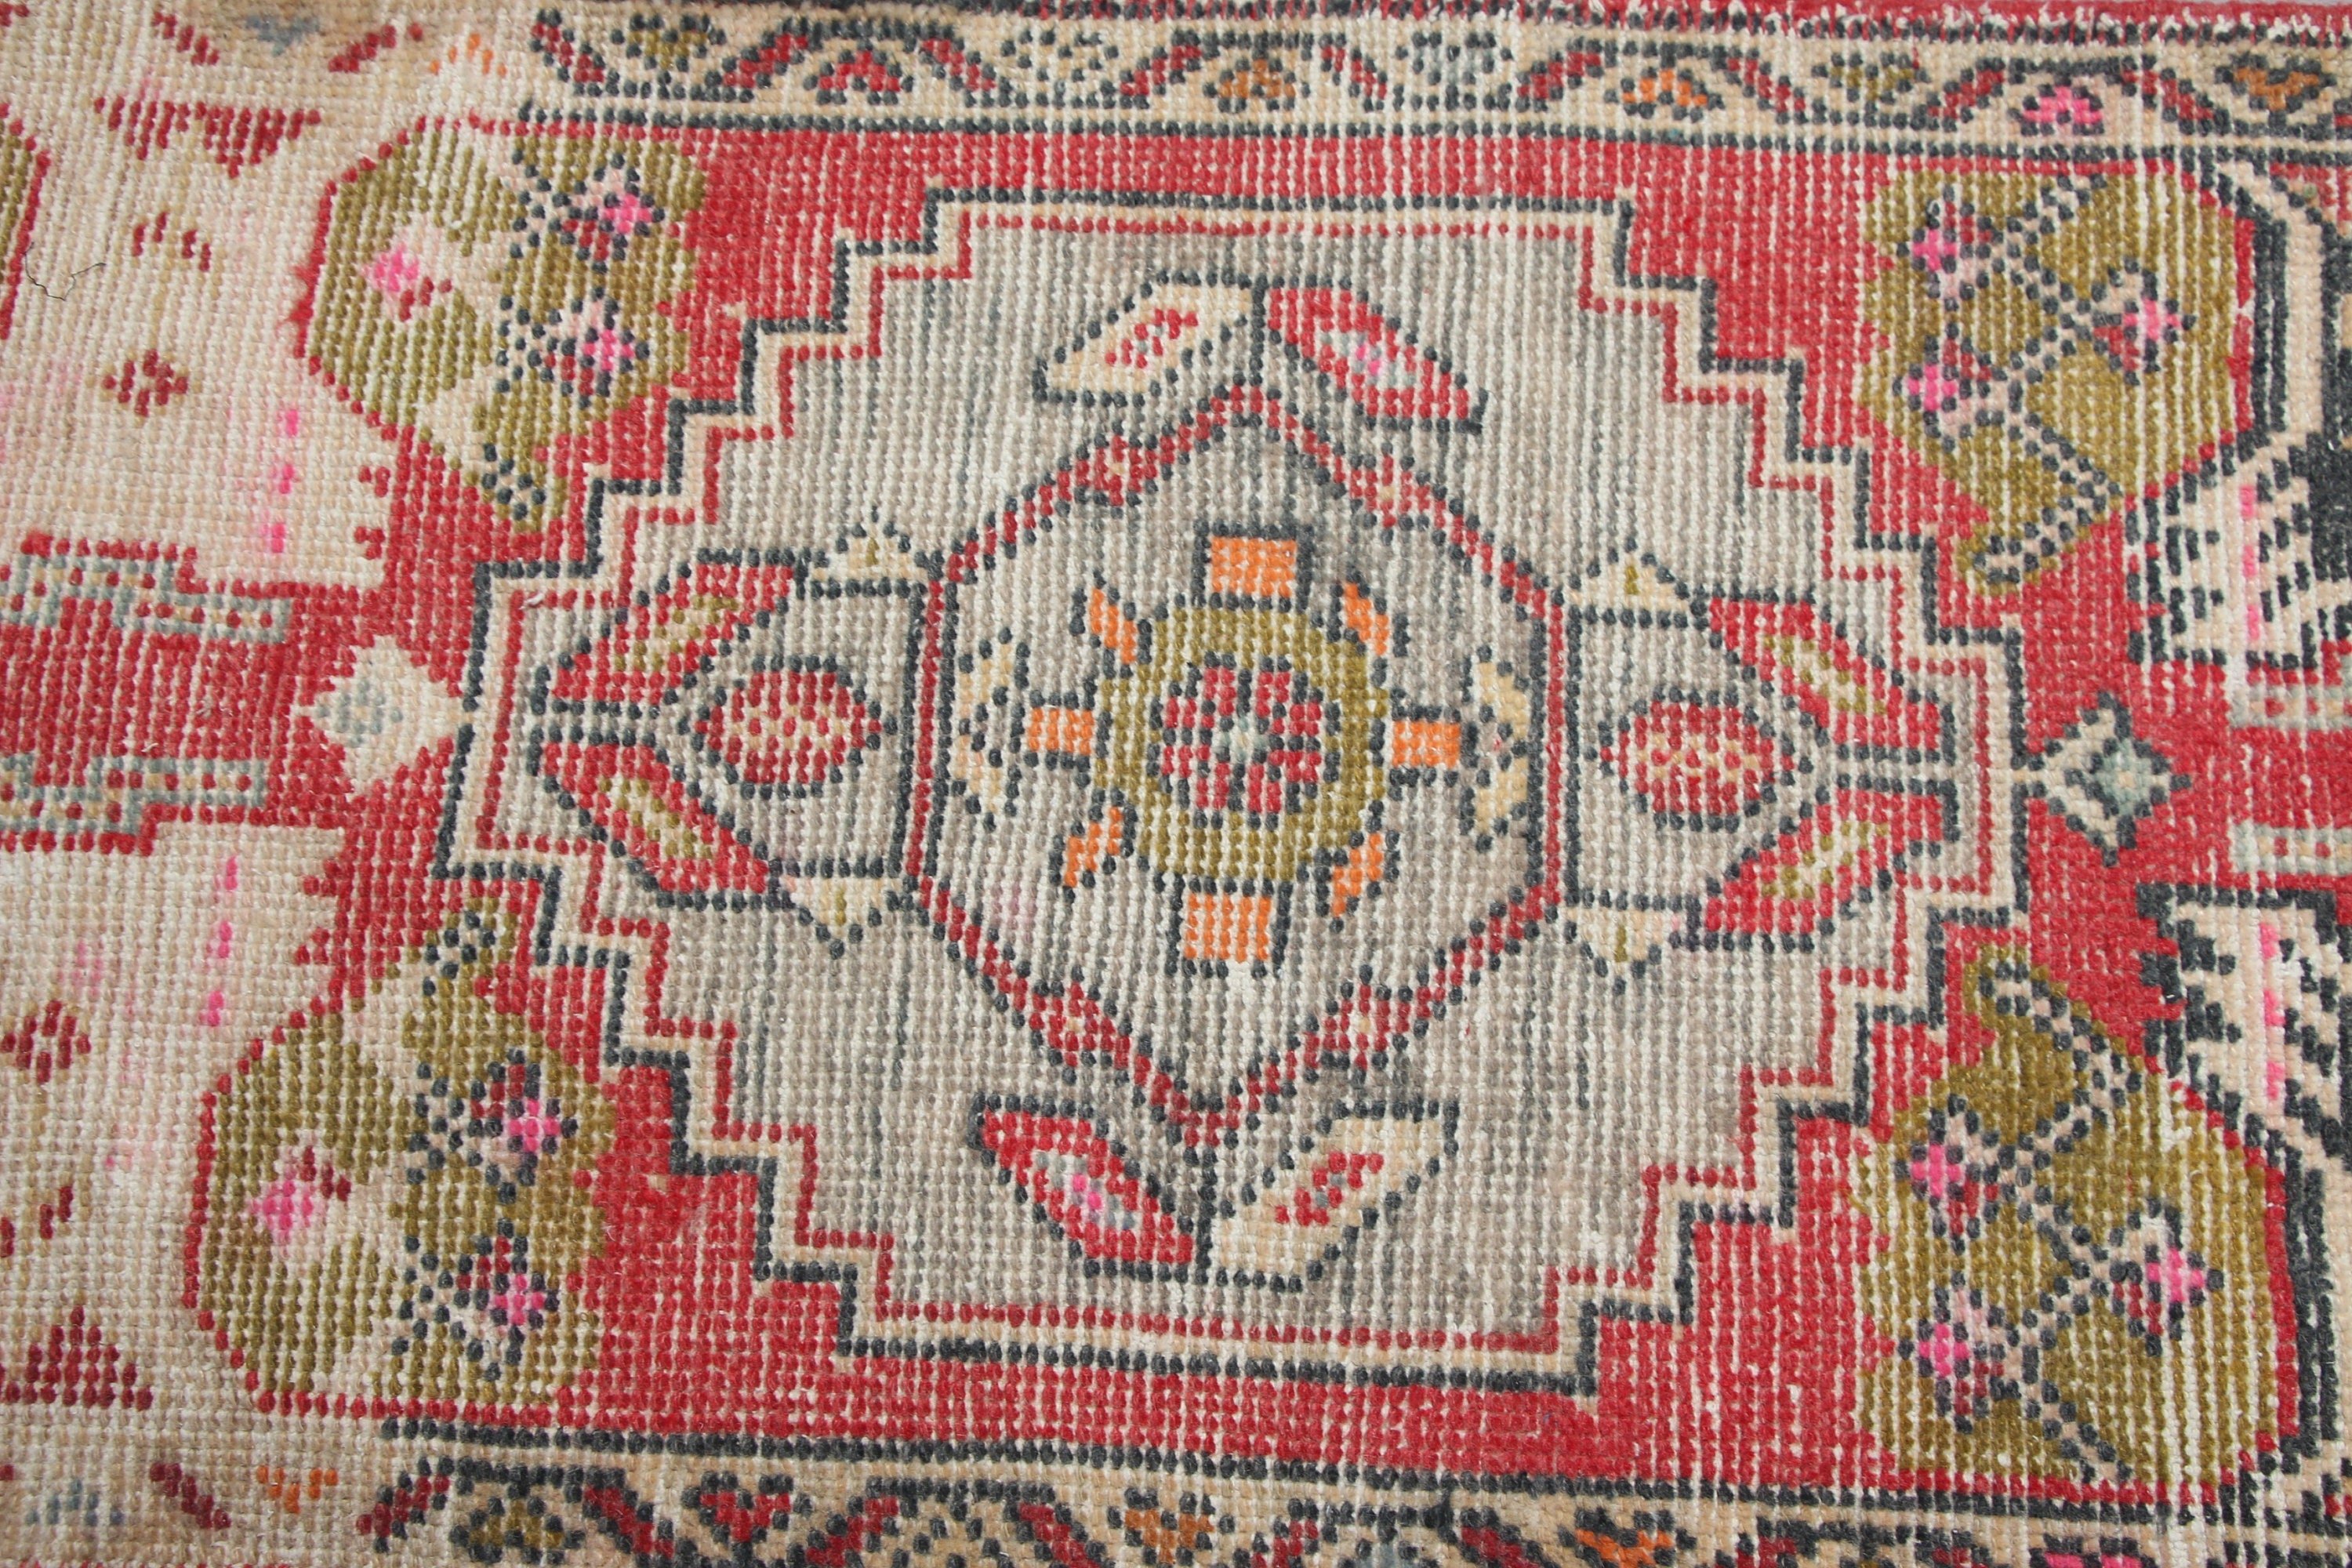 Moroccan Rugs, Entry Rug, Rugs for Nursery, Anatolian Rug, Vintage Rugs, 1.8x3.7 ft Small Rug, Door Mat Rug, Turkish Rugs, Red Cool Rugs